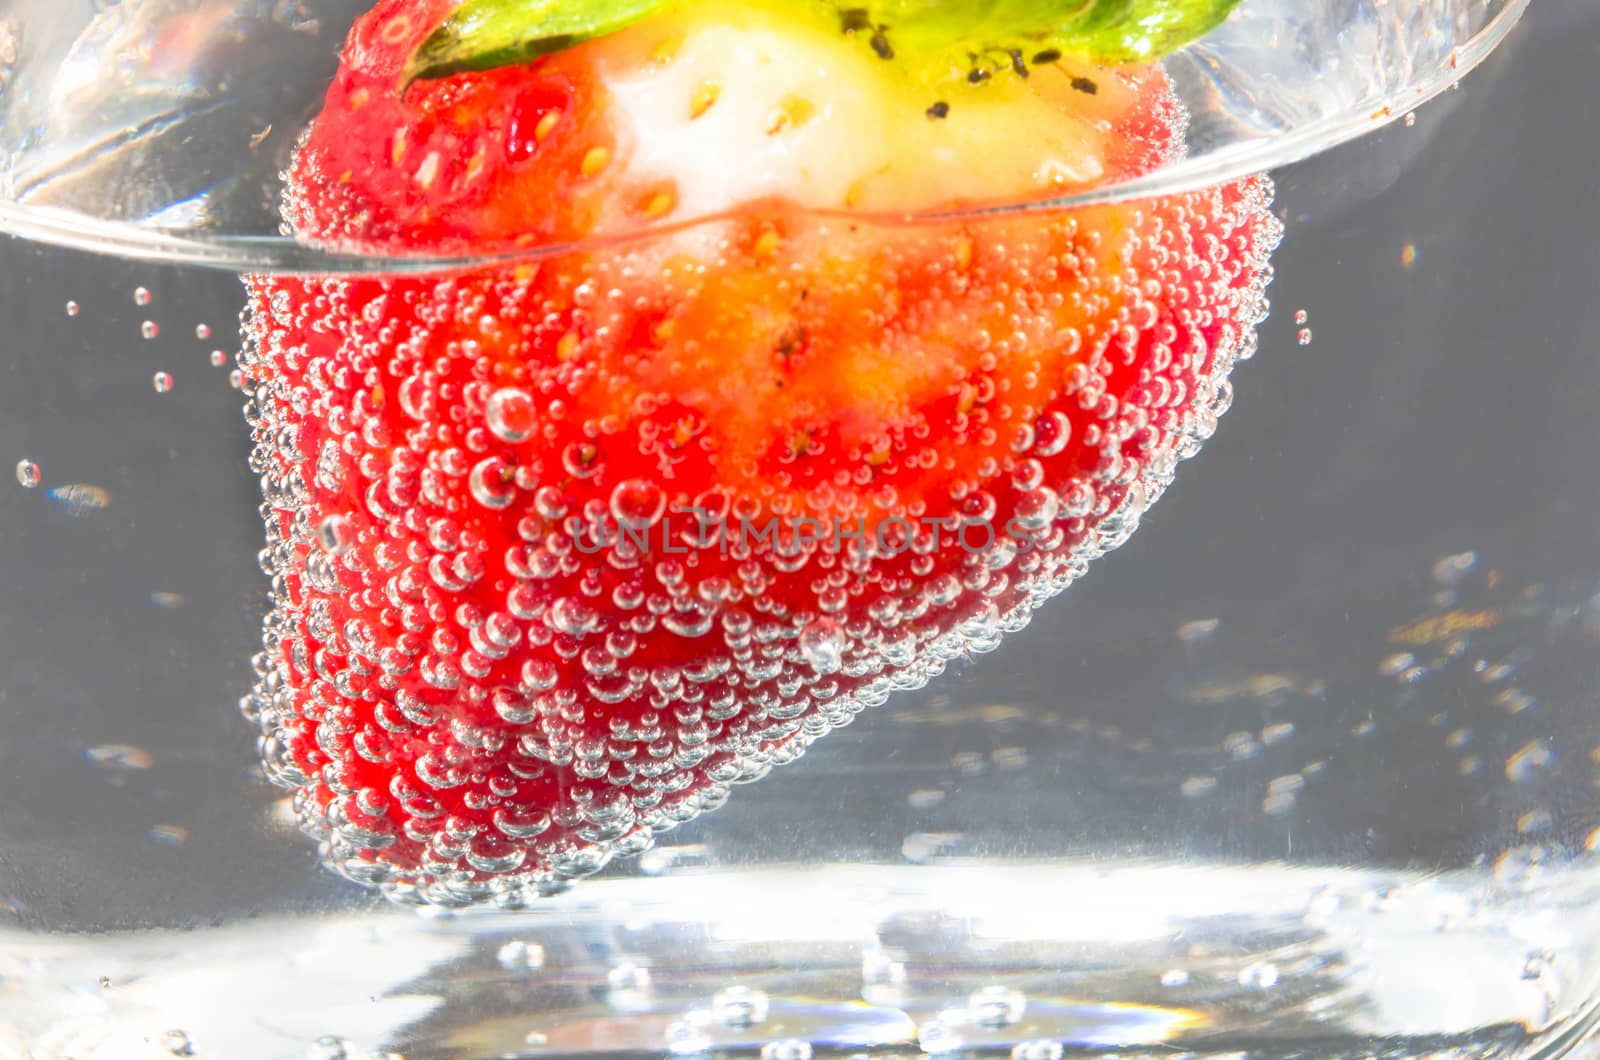 Close-up of strawberry floating in sparkling mineral water glass.
